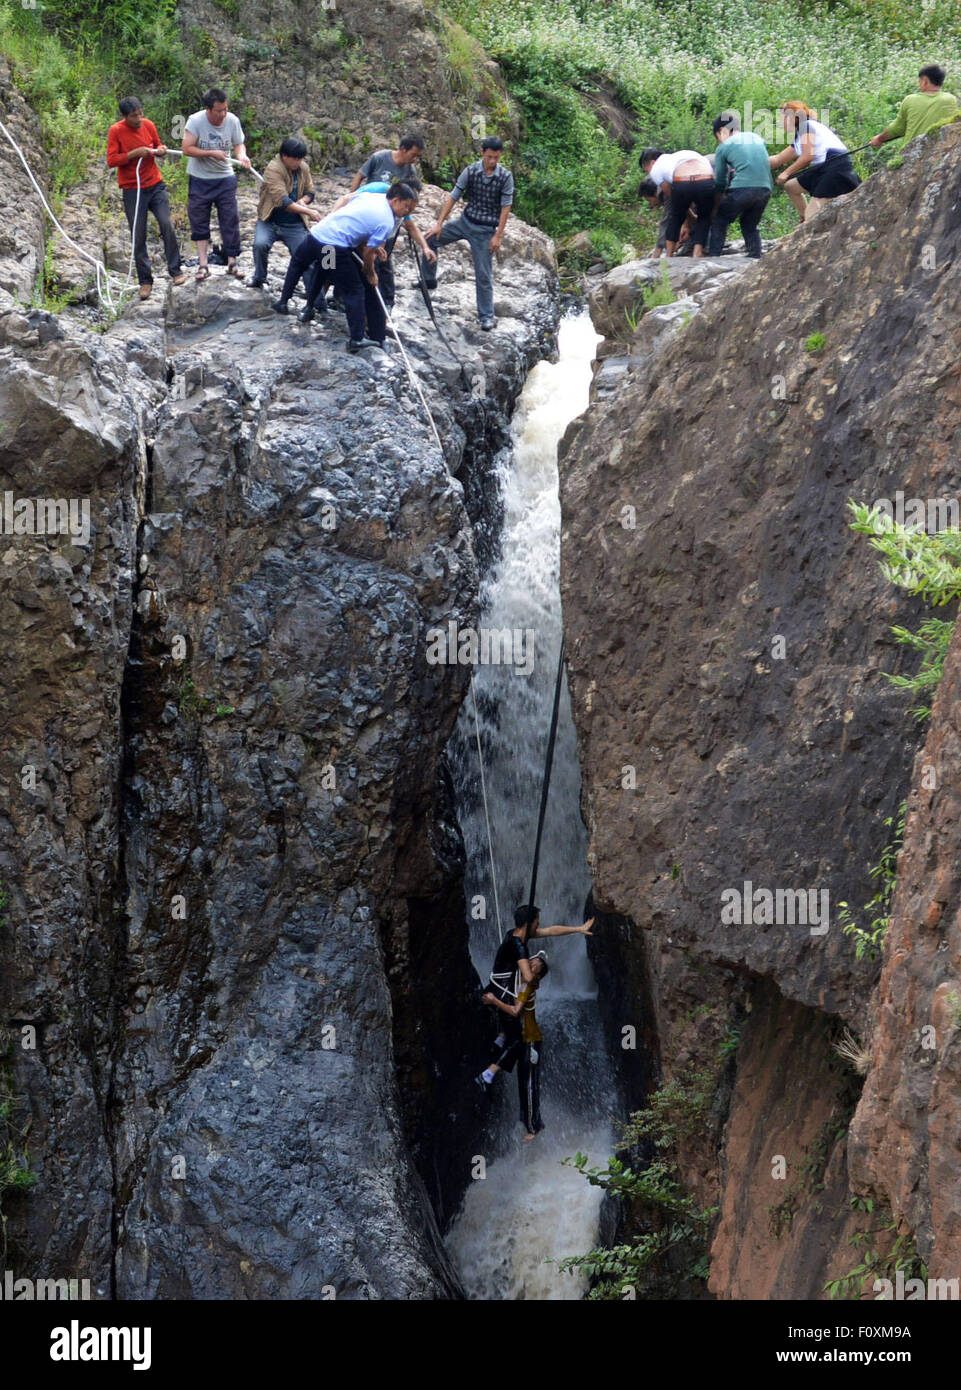 Beijing, China's Guizhou Province. 16th Aug, 2015. People rescue a boy at Diaoshui Village of Mazha Town in Weining County, southwest China's Guizhou Province, Aug. 16, 2015. The boy was washed down the waterfall and hung between the cliffs. © Yang Wenbin/Xinhua/Alamy Live News Stock Photo